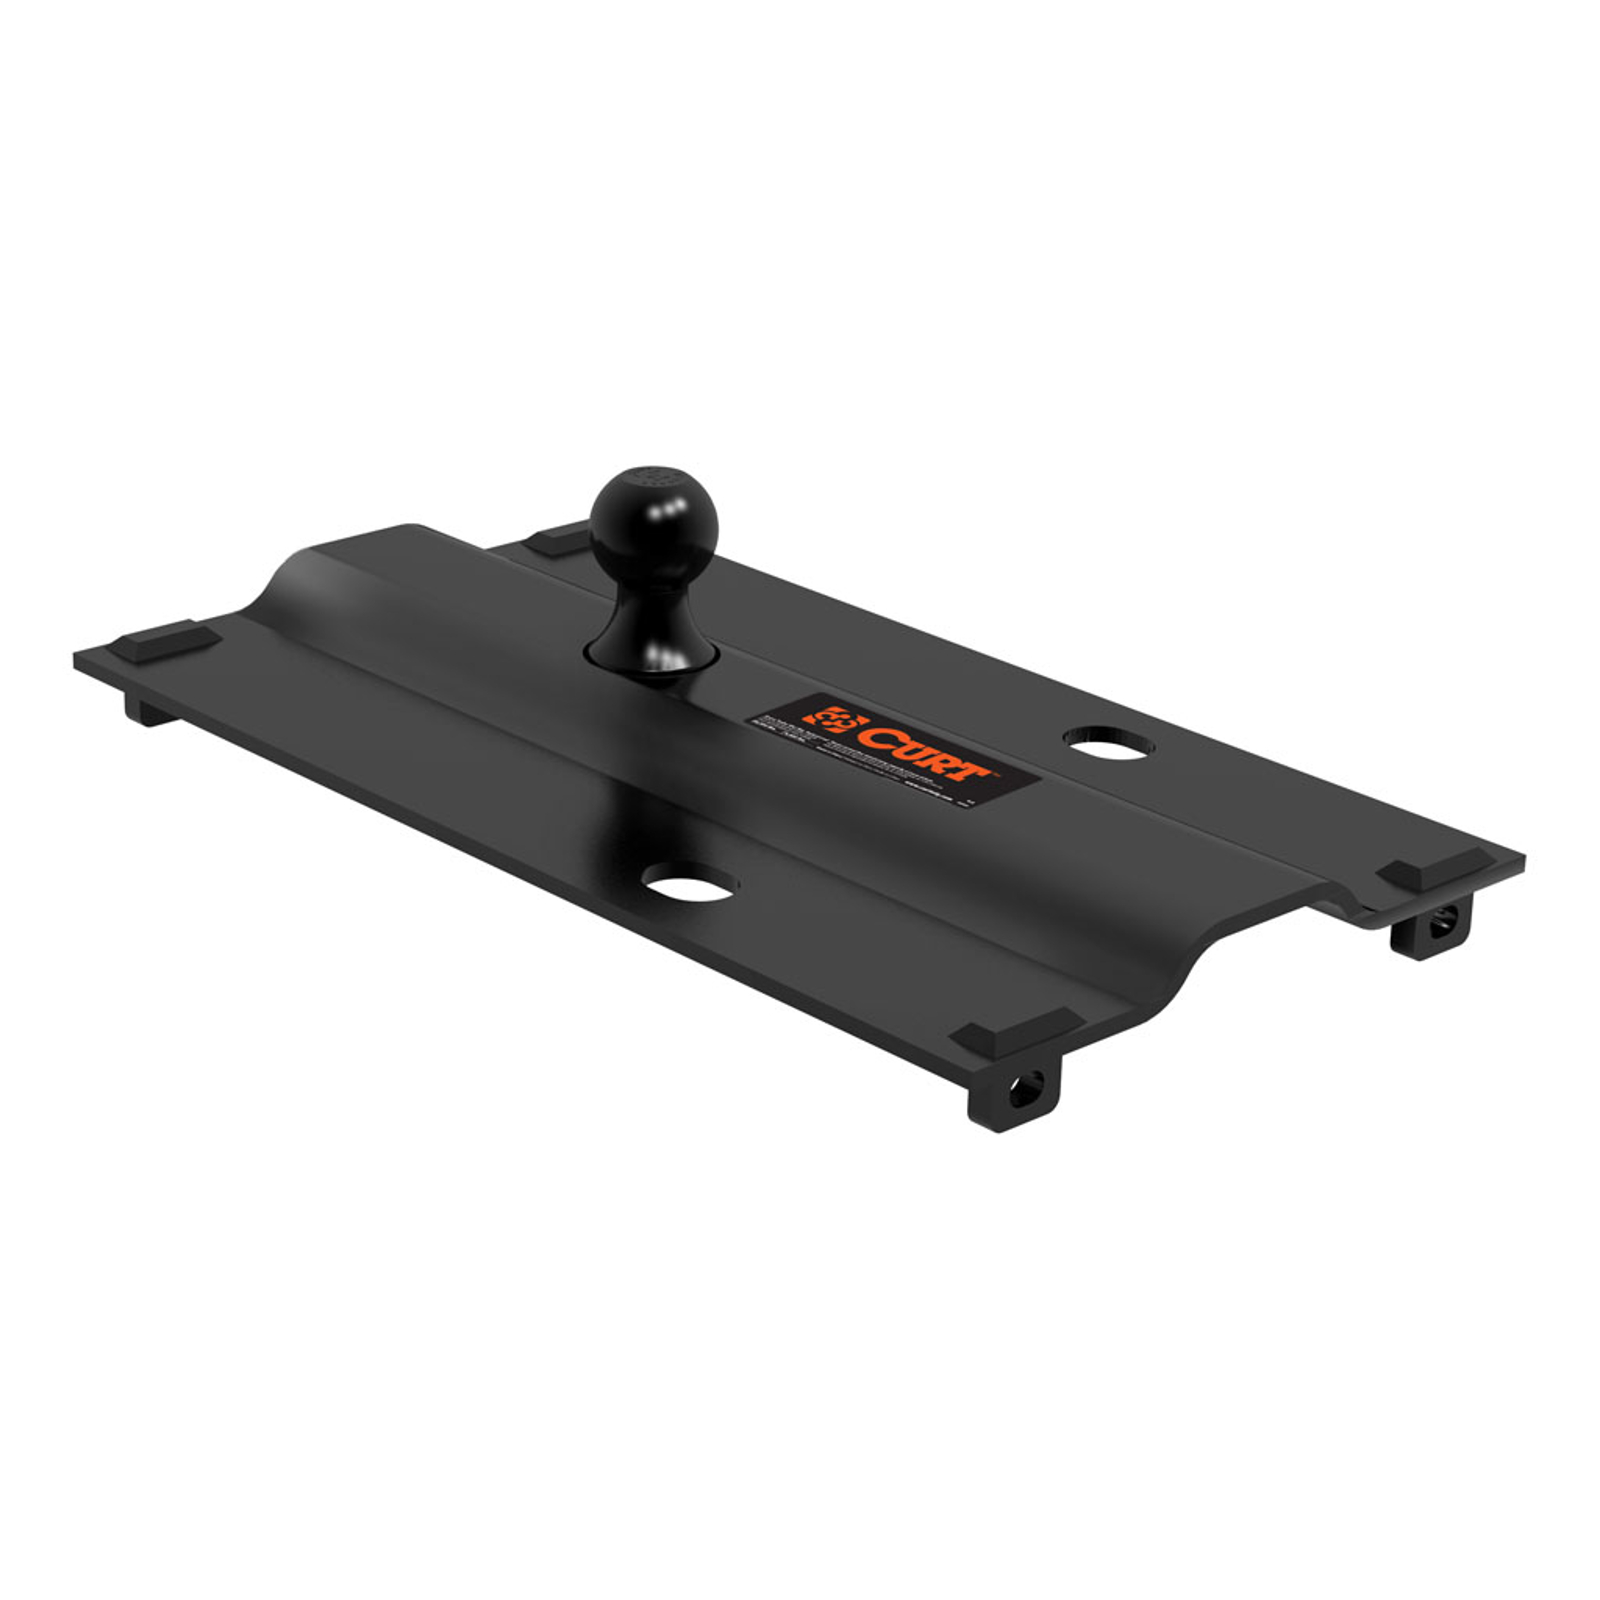 Gooseneck Bent Plate-2-5/16" trailer ball included-Mounts to all standard fifth wheel rails-Durable pwdr coat fin